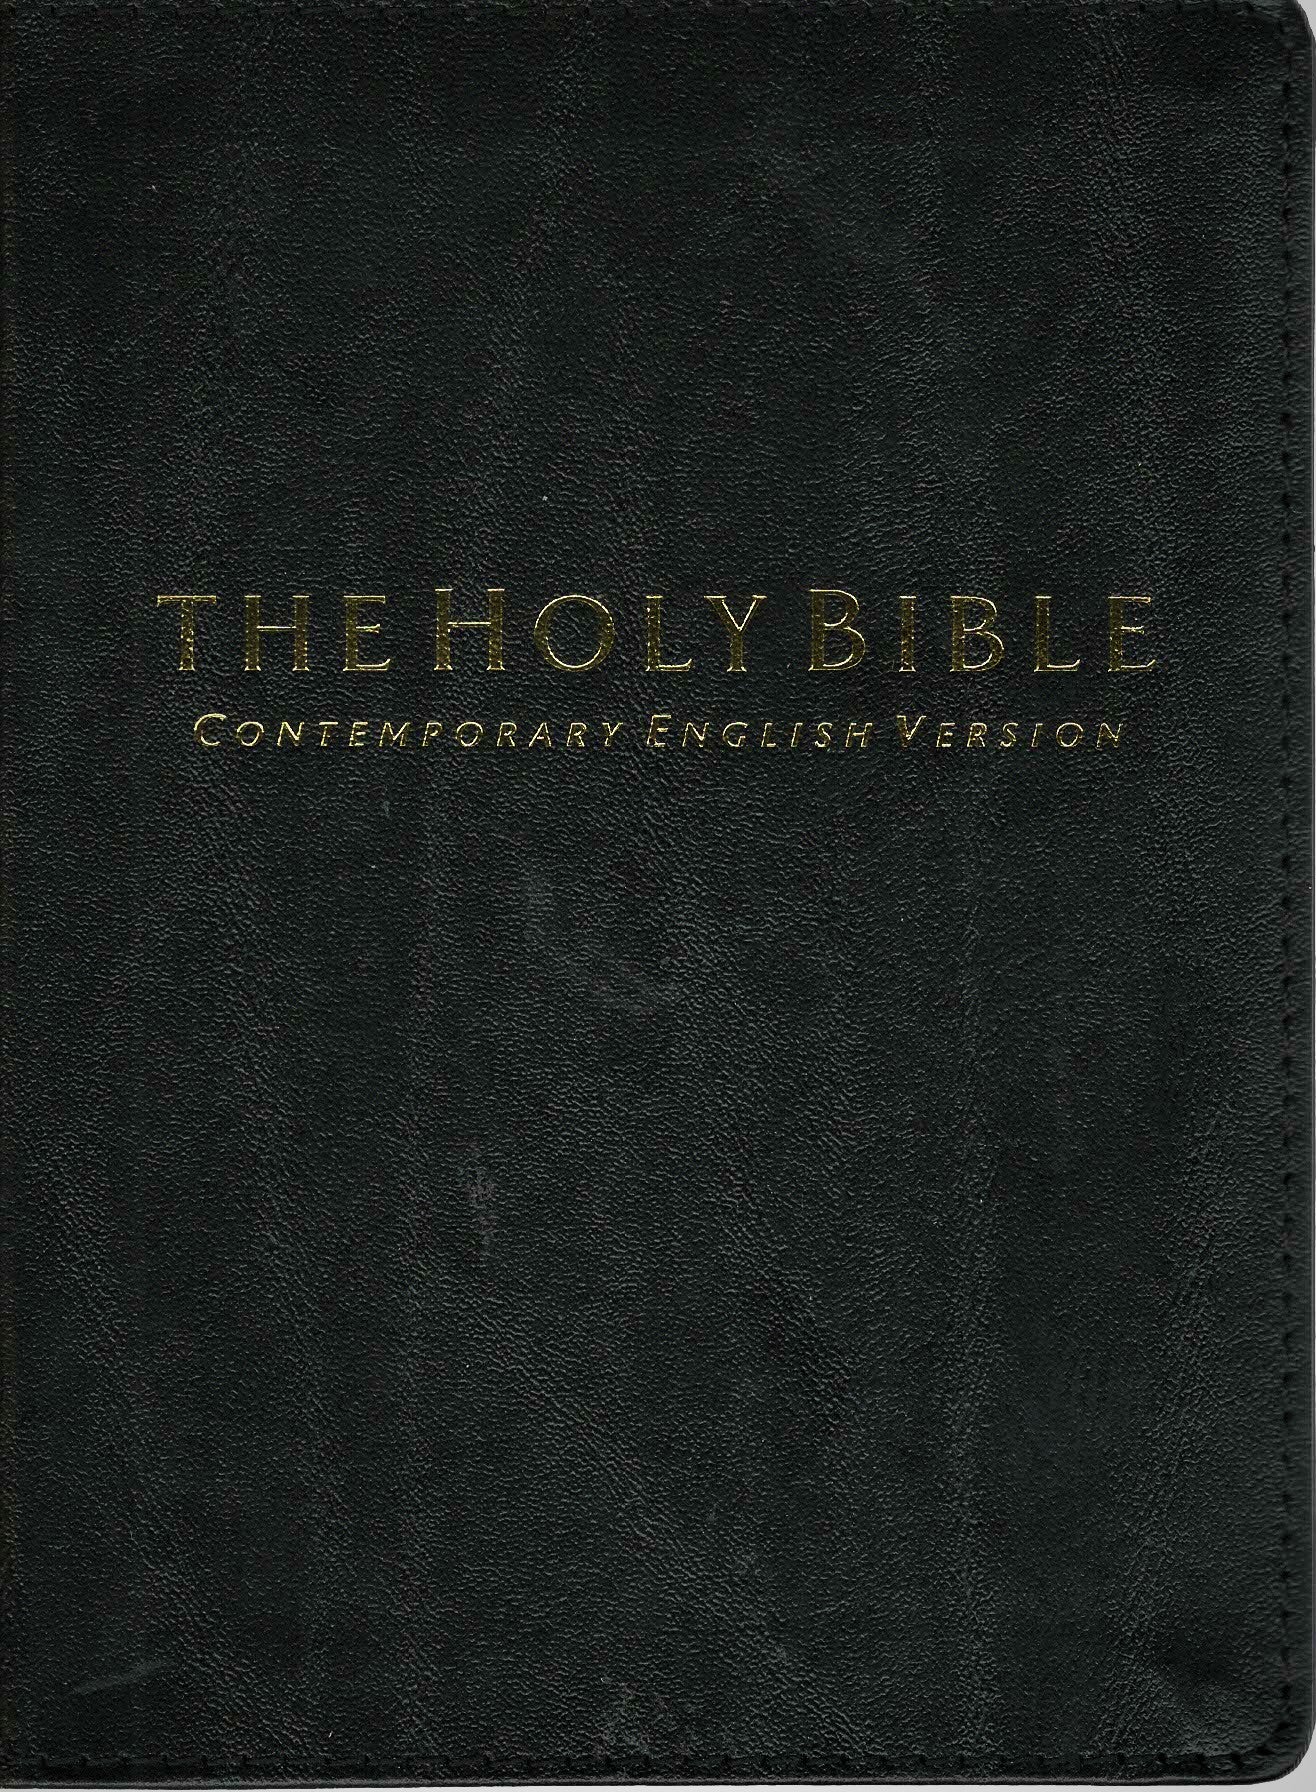 American Bible Society Contemporary English Version (CEV) Bible, Compact Edition - Bonded Leather (Black)